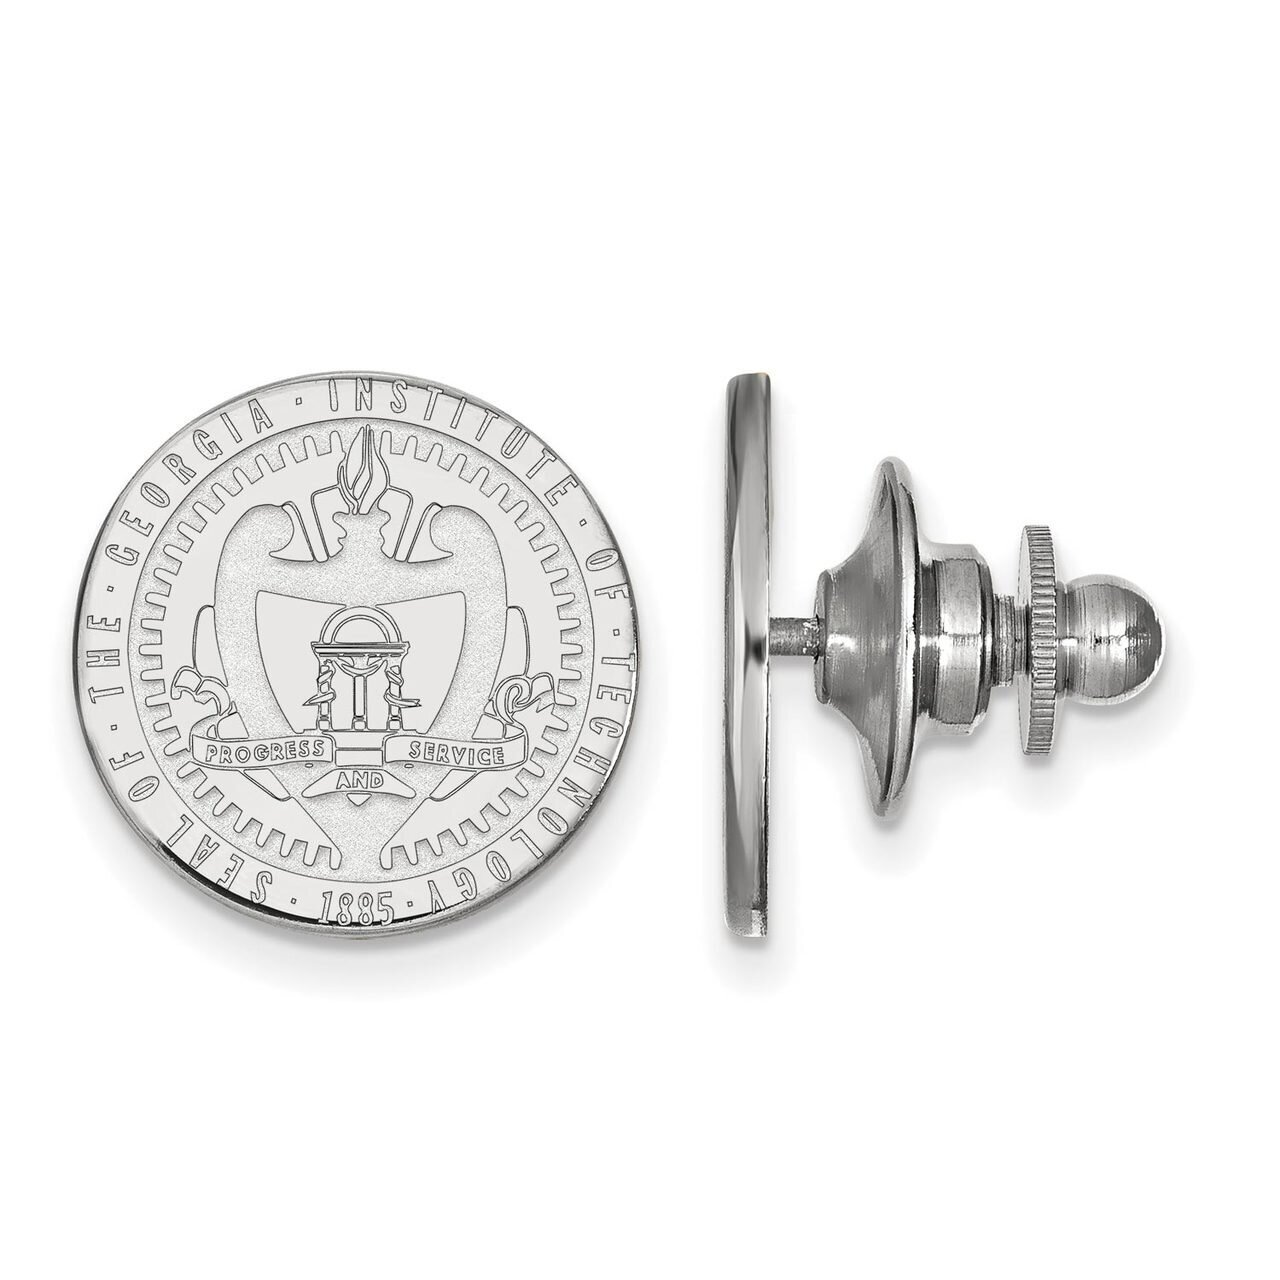 Georgia Institute of Technology Crest Lapel Pin 14k White Gold 4W057GT